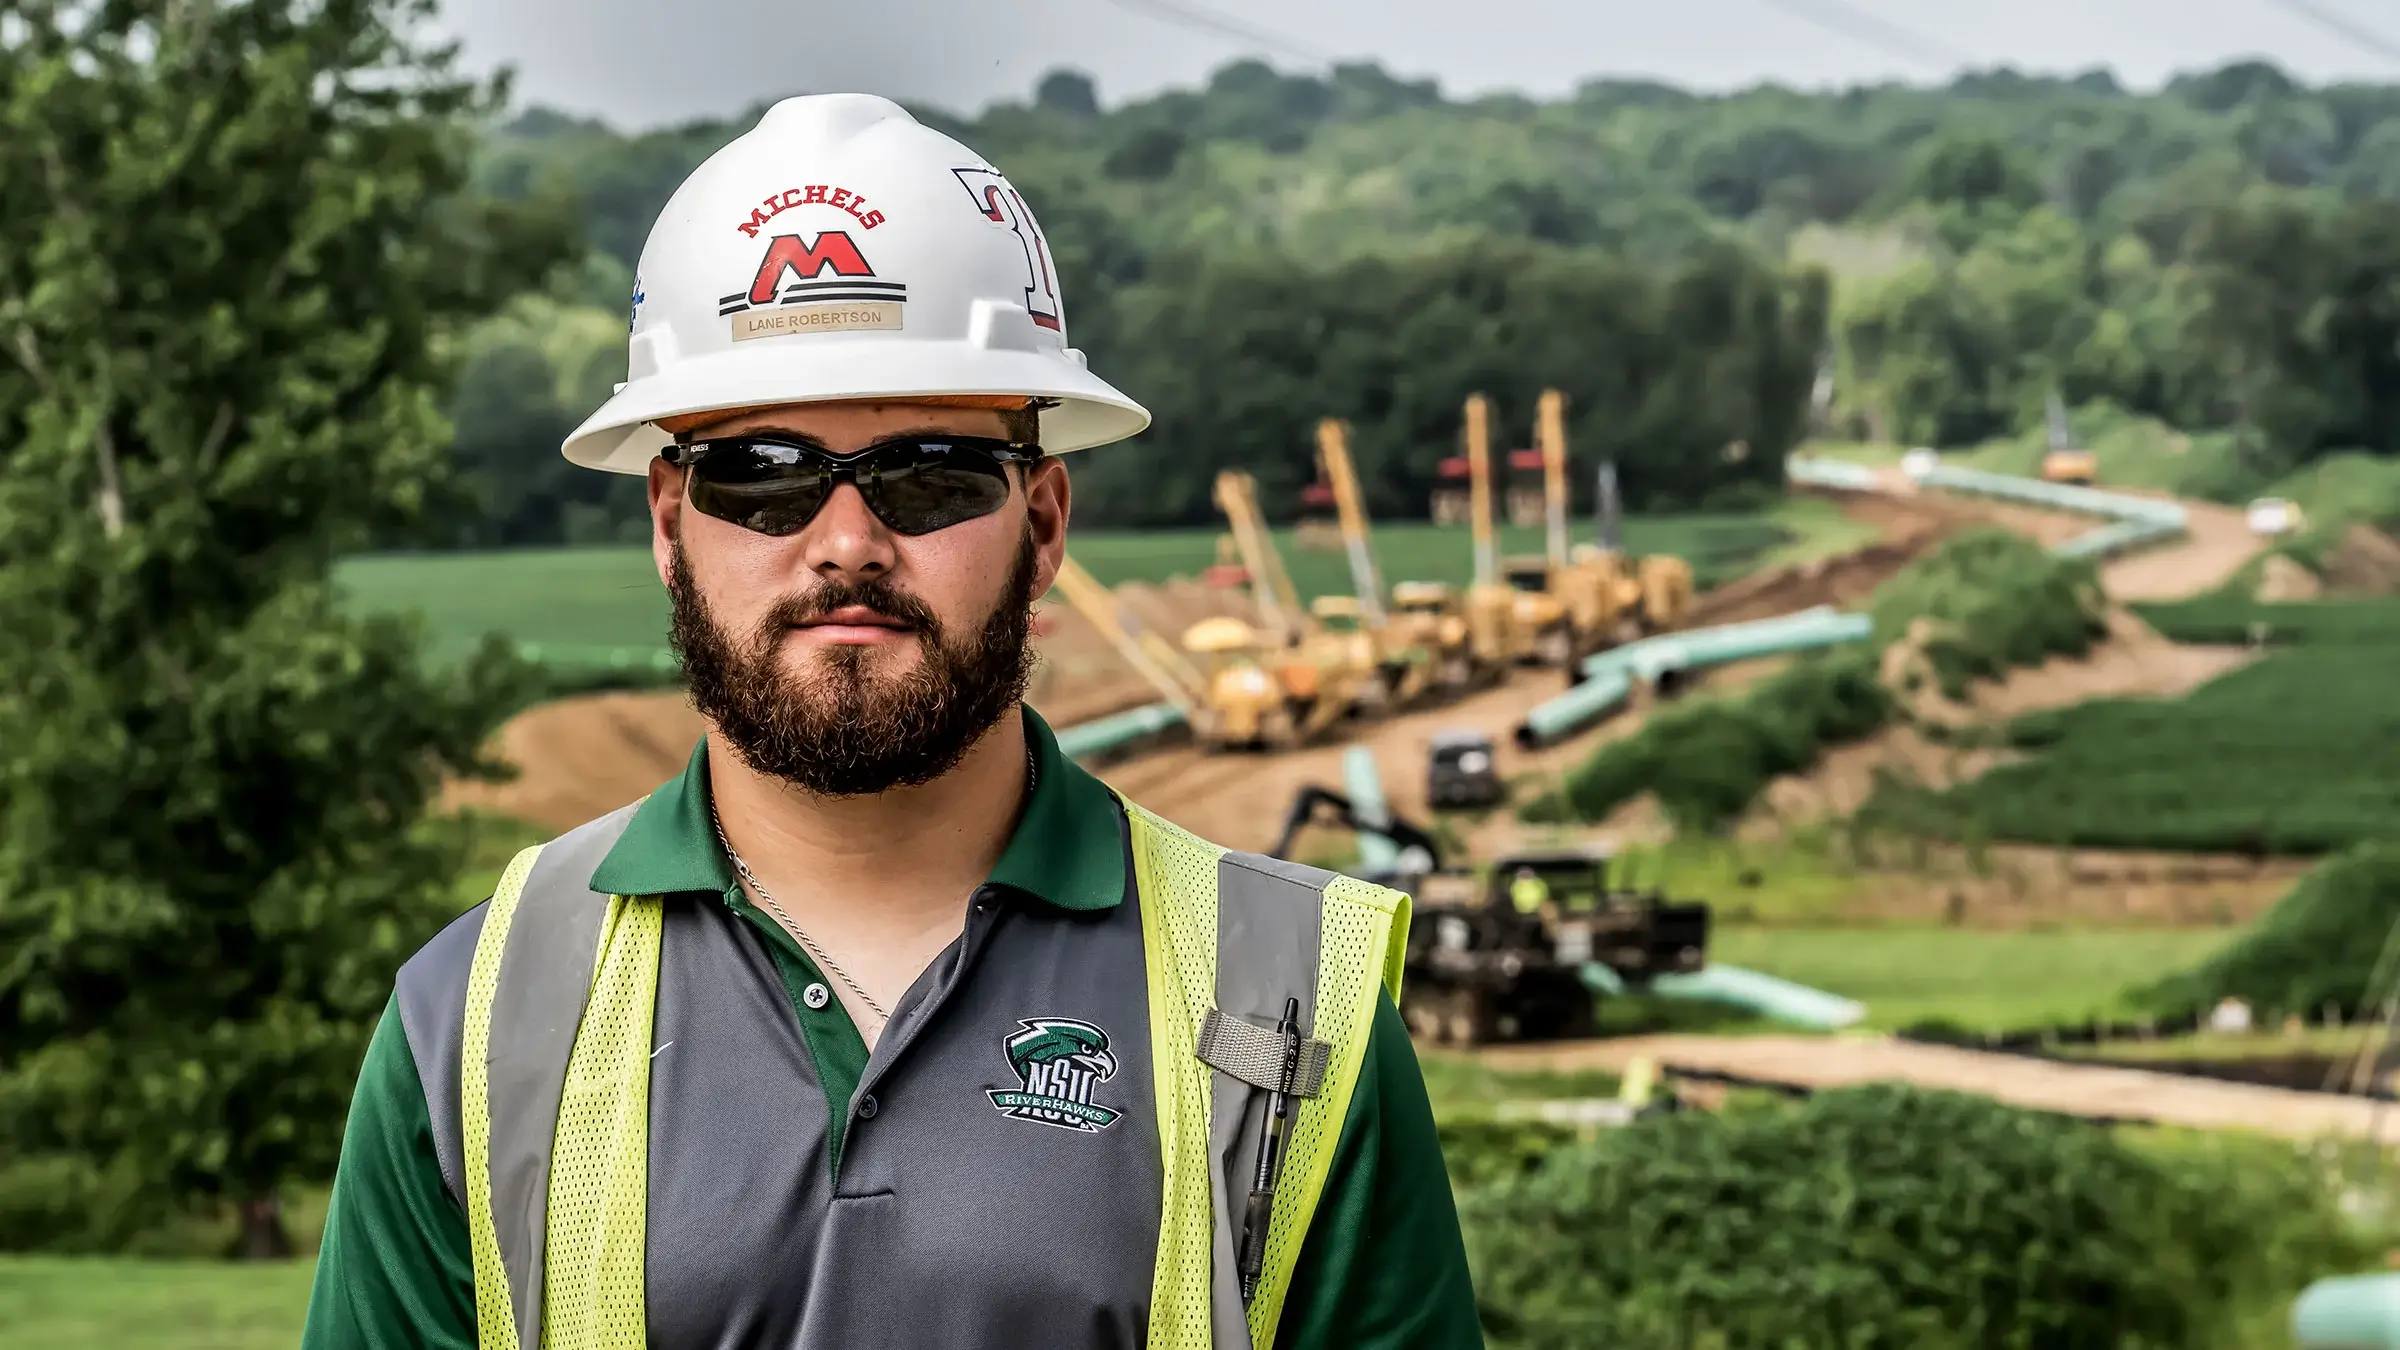 A Michels crew member wearing safety glasses and a hardhat stands near a major pipeline project.